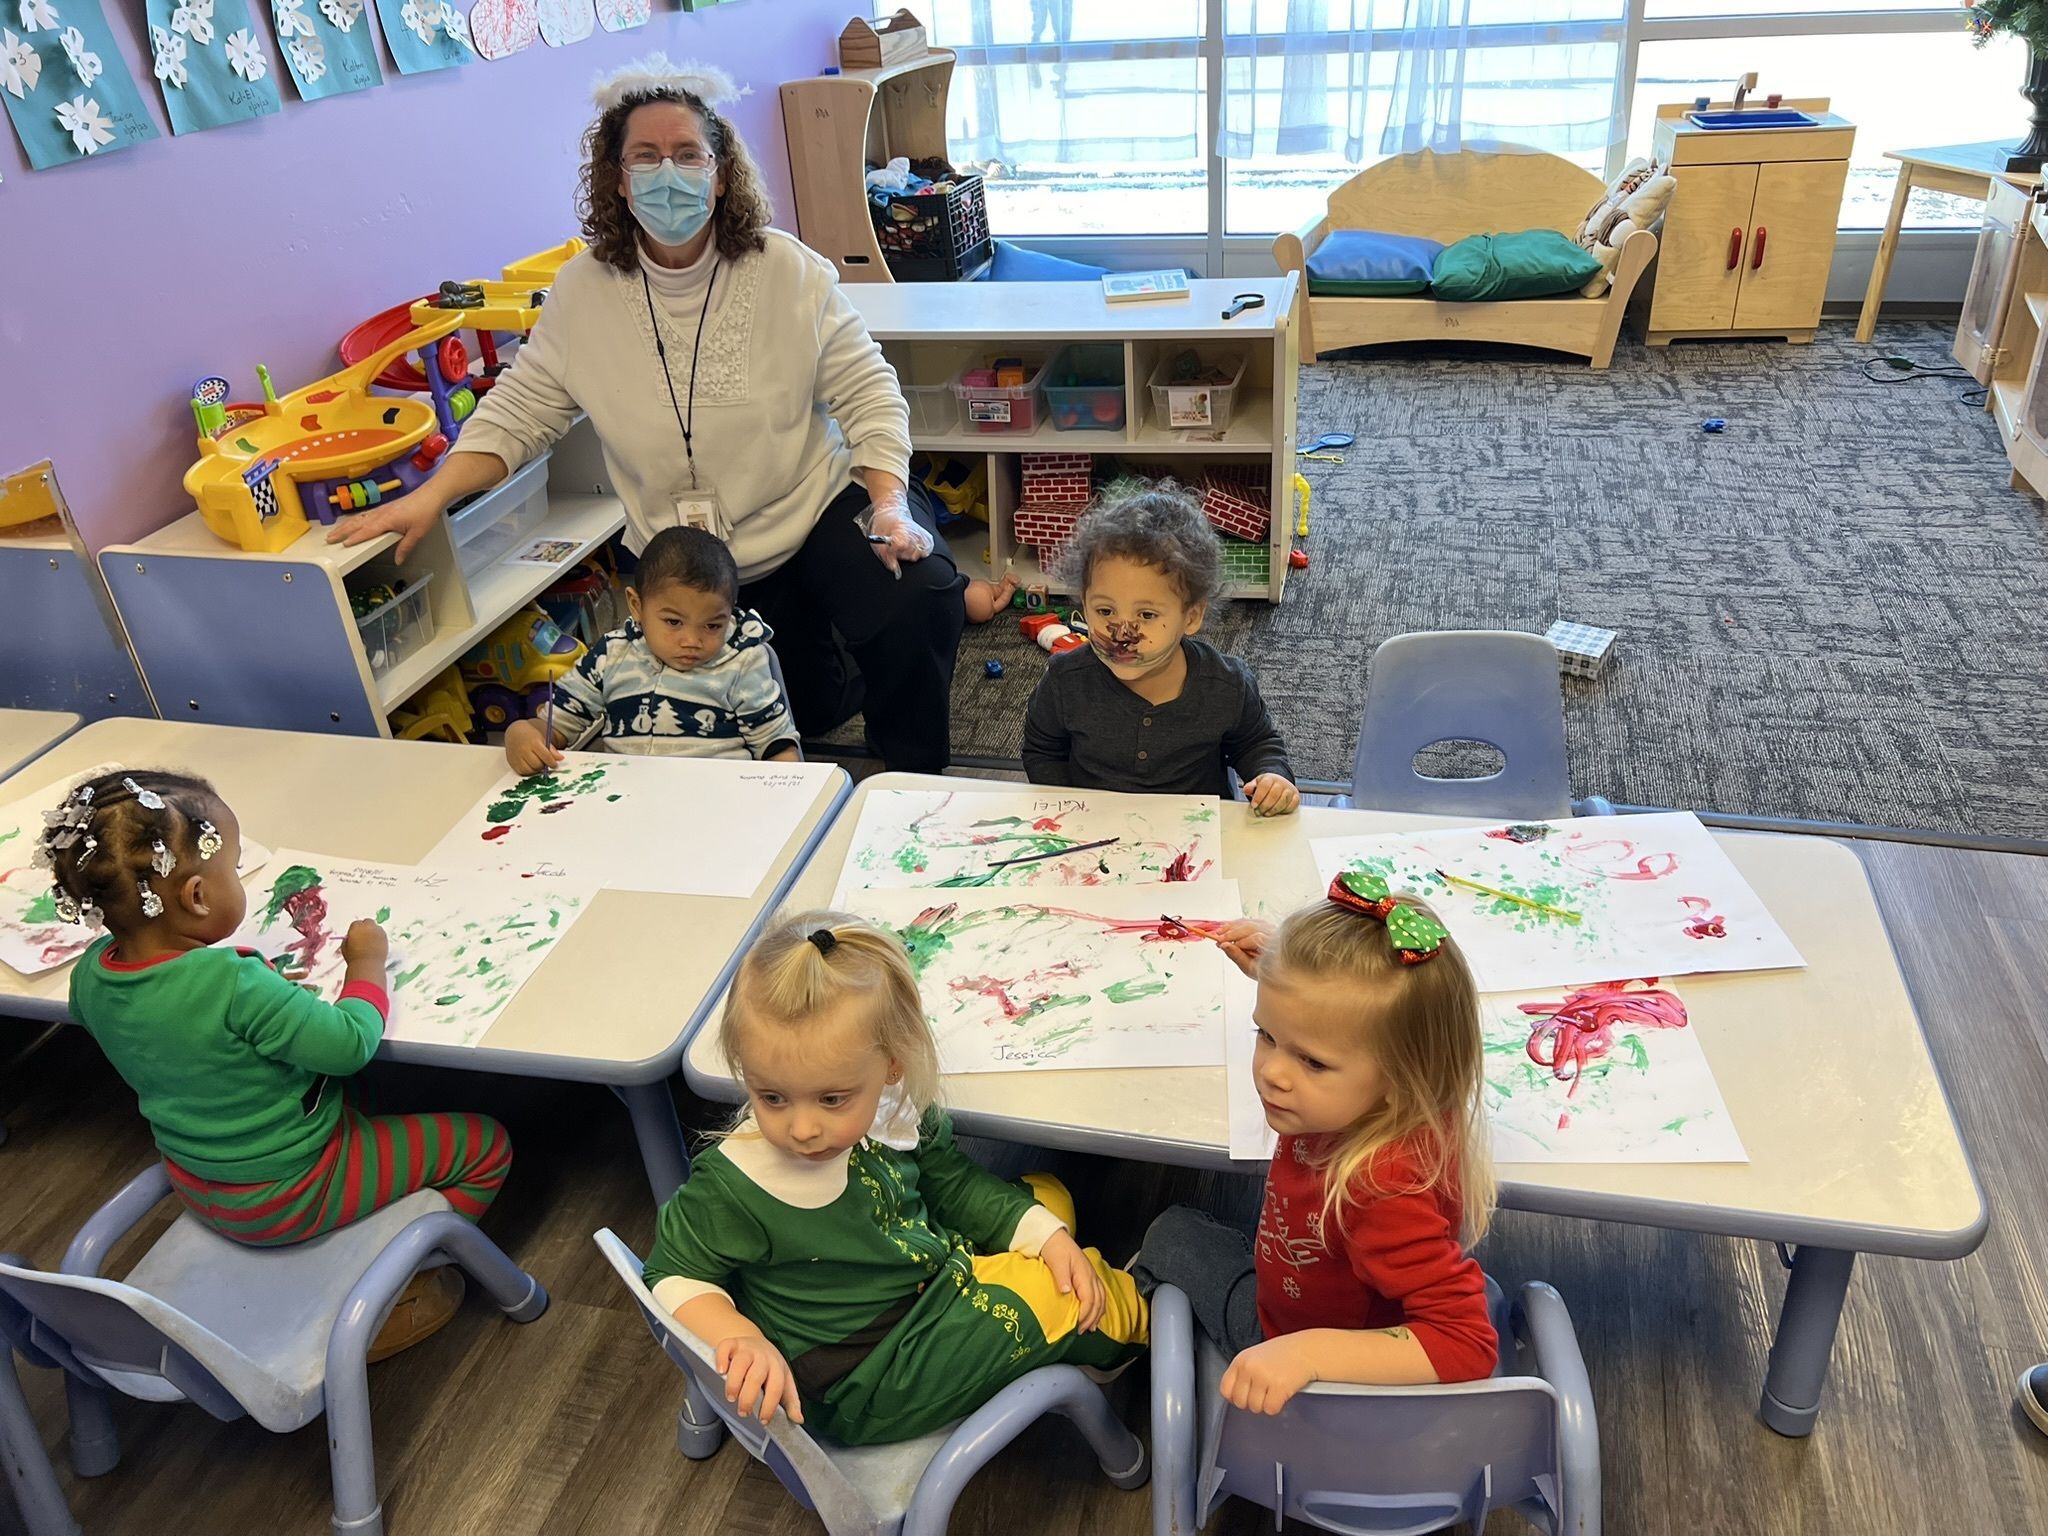 A teacher wearing a mask sits at a dask in a classroom with a few other students. The students all have paintings in front of them they are working on.